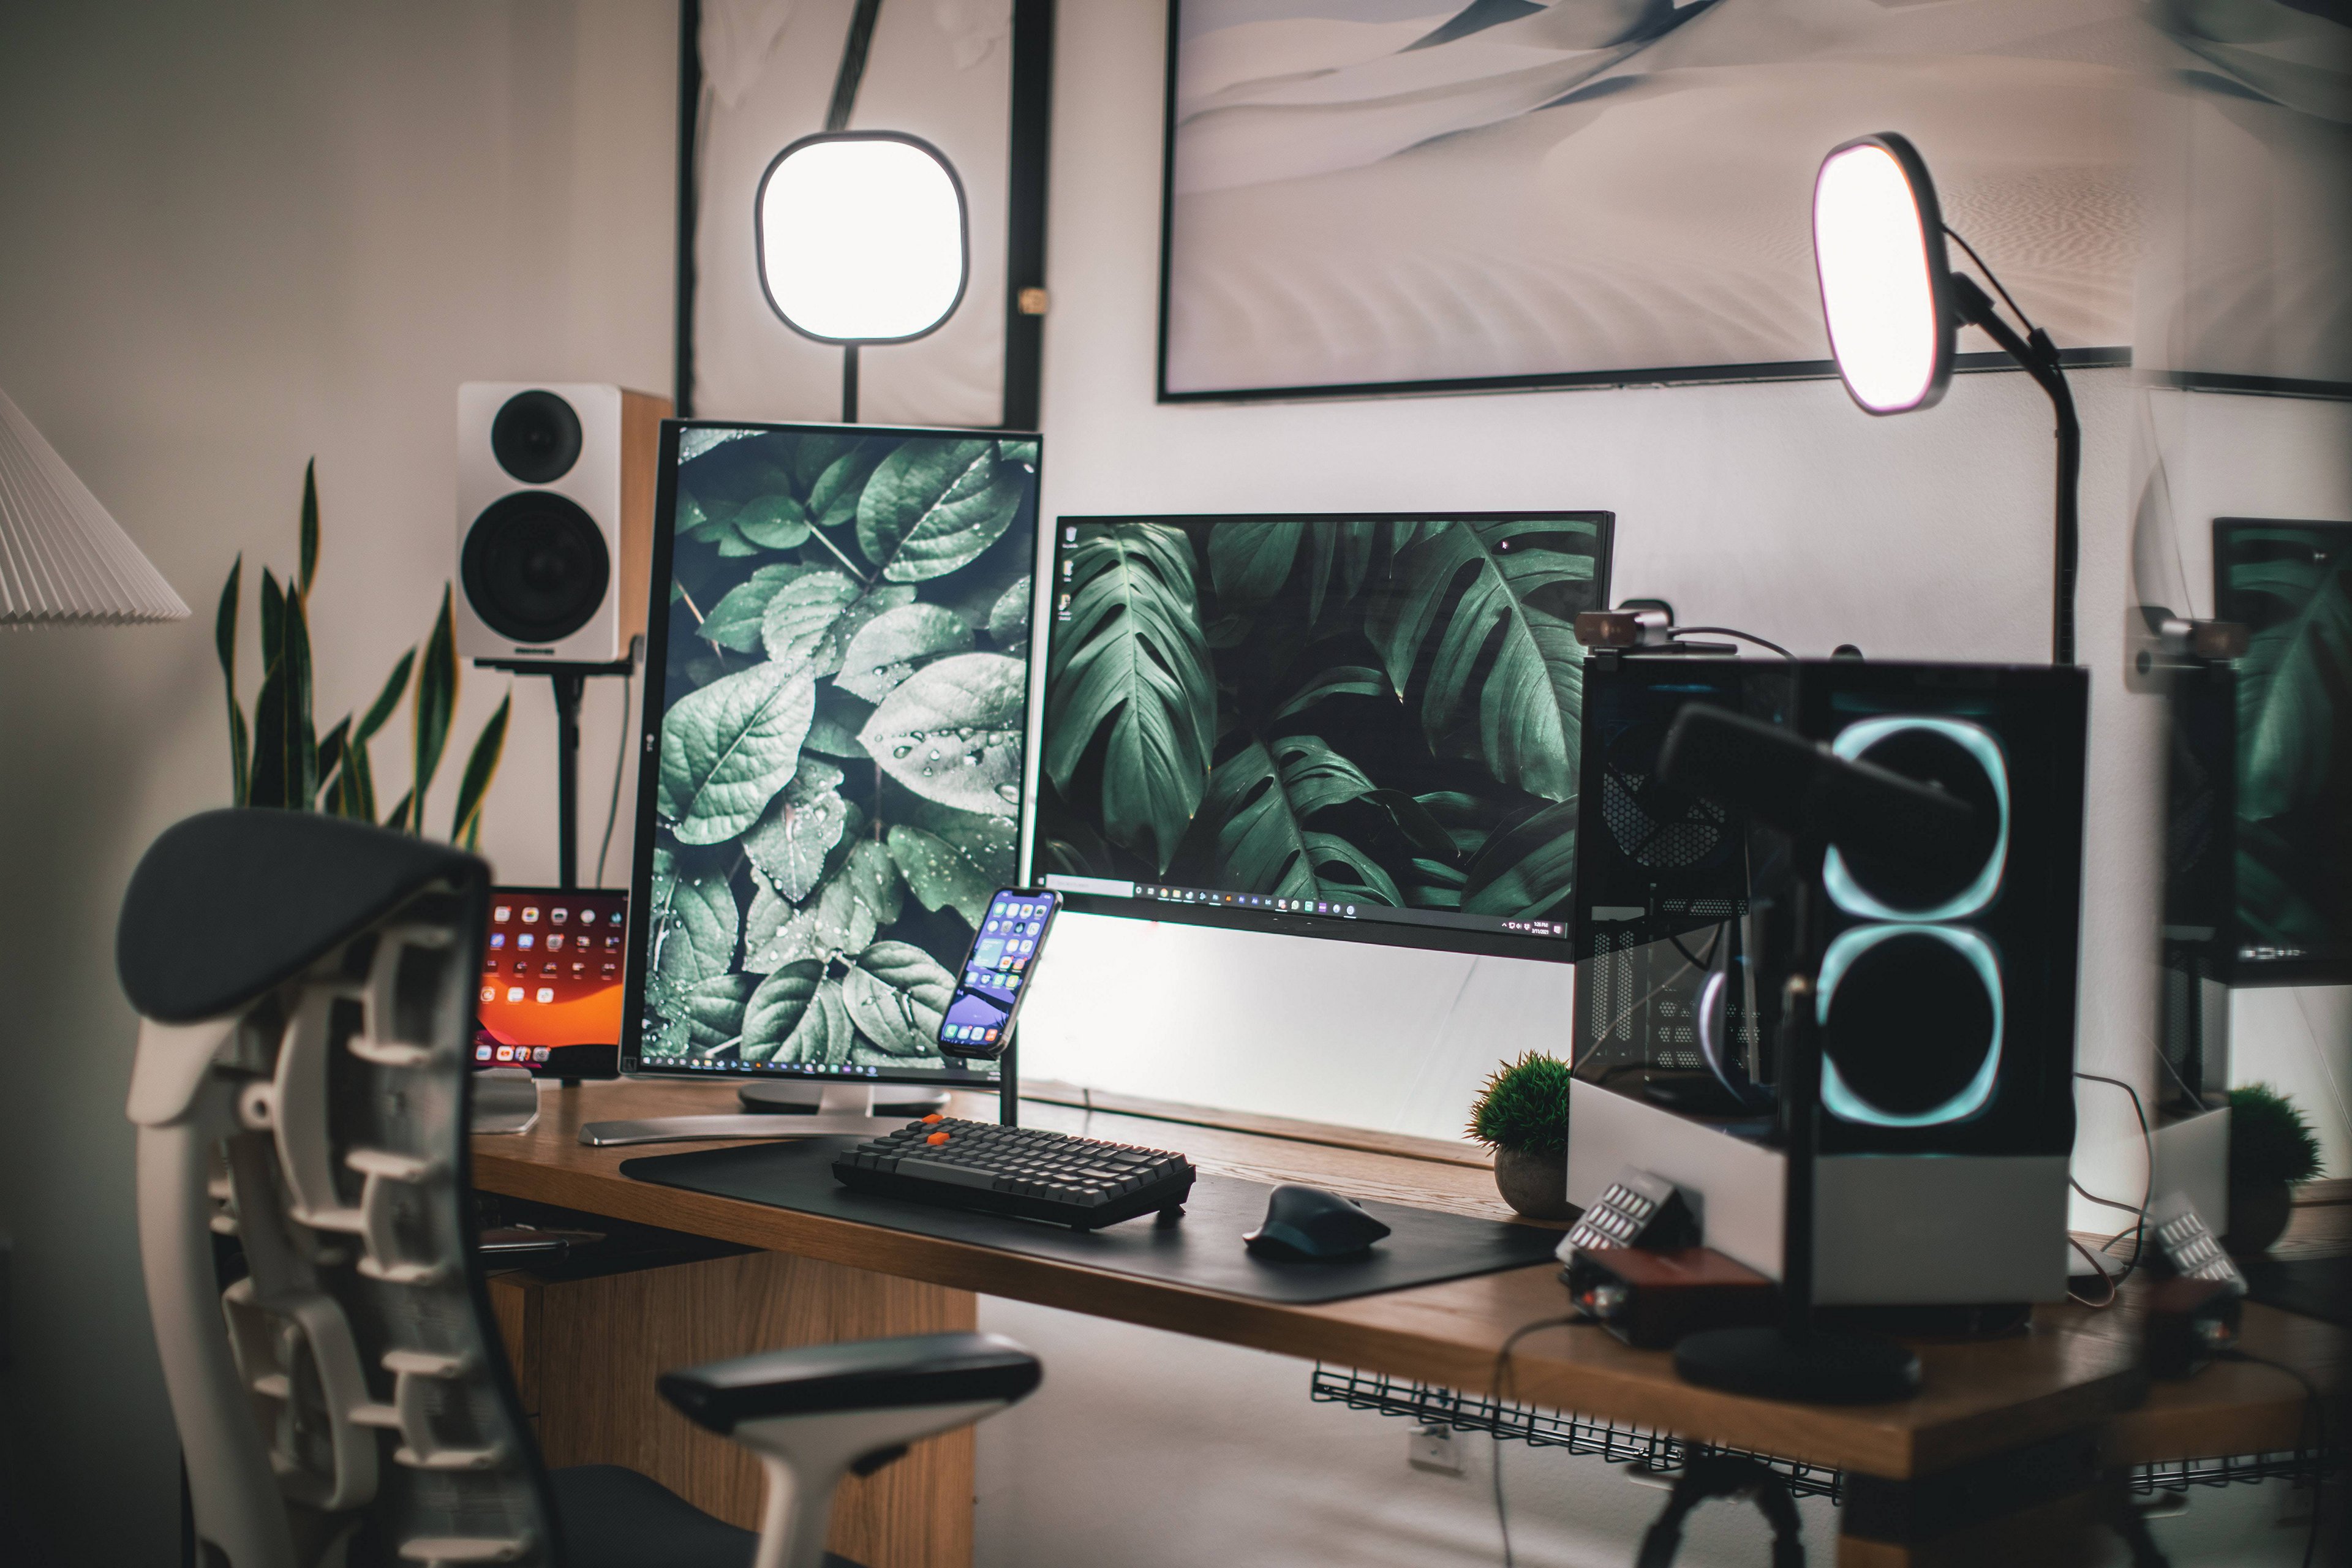 Gamers Unite: Elevate Your Play with These 8 Must-Have Gaming Desk Setup  Transformations